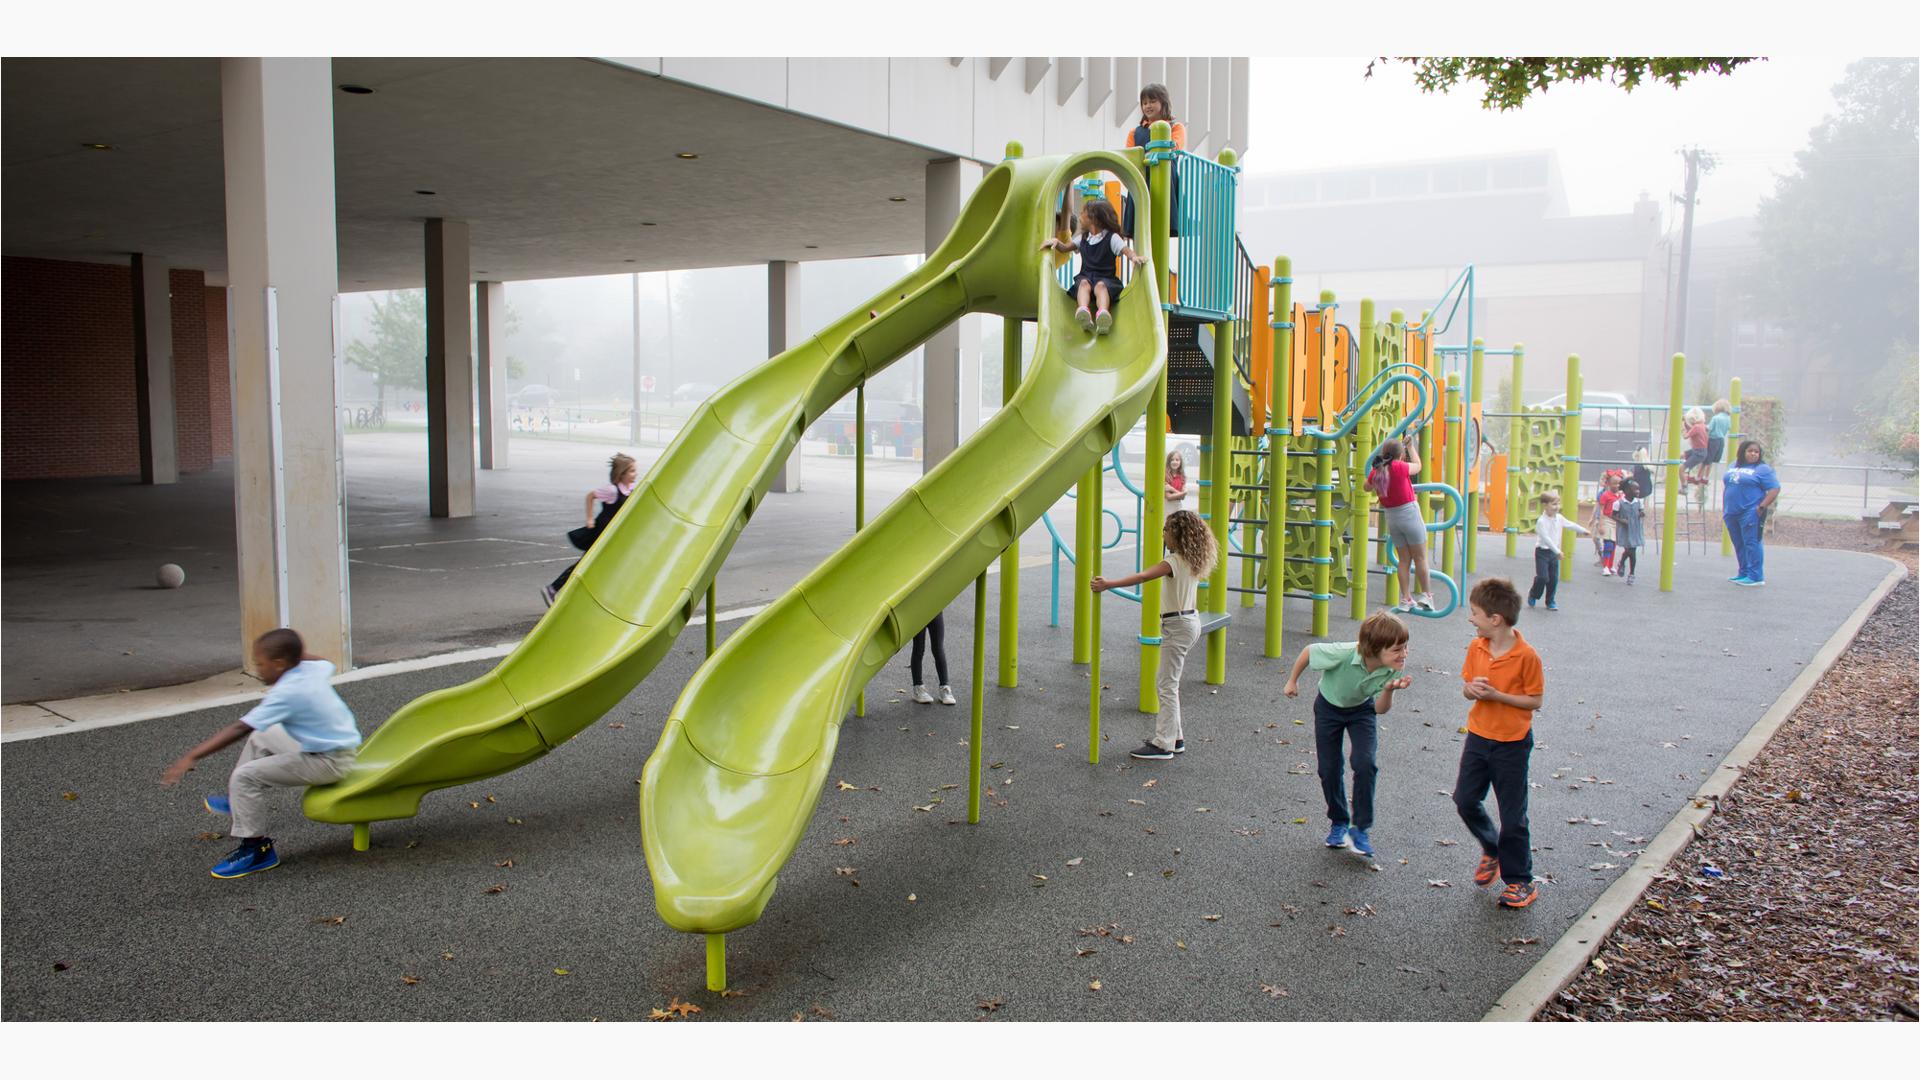 School kids playing in the misting rain on a playground with two limon colored slides in the foreground. 